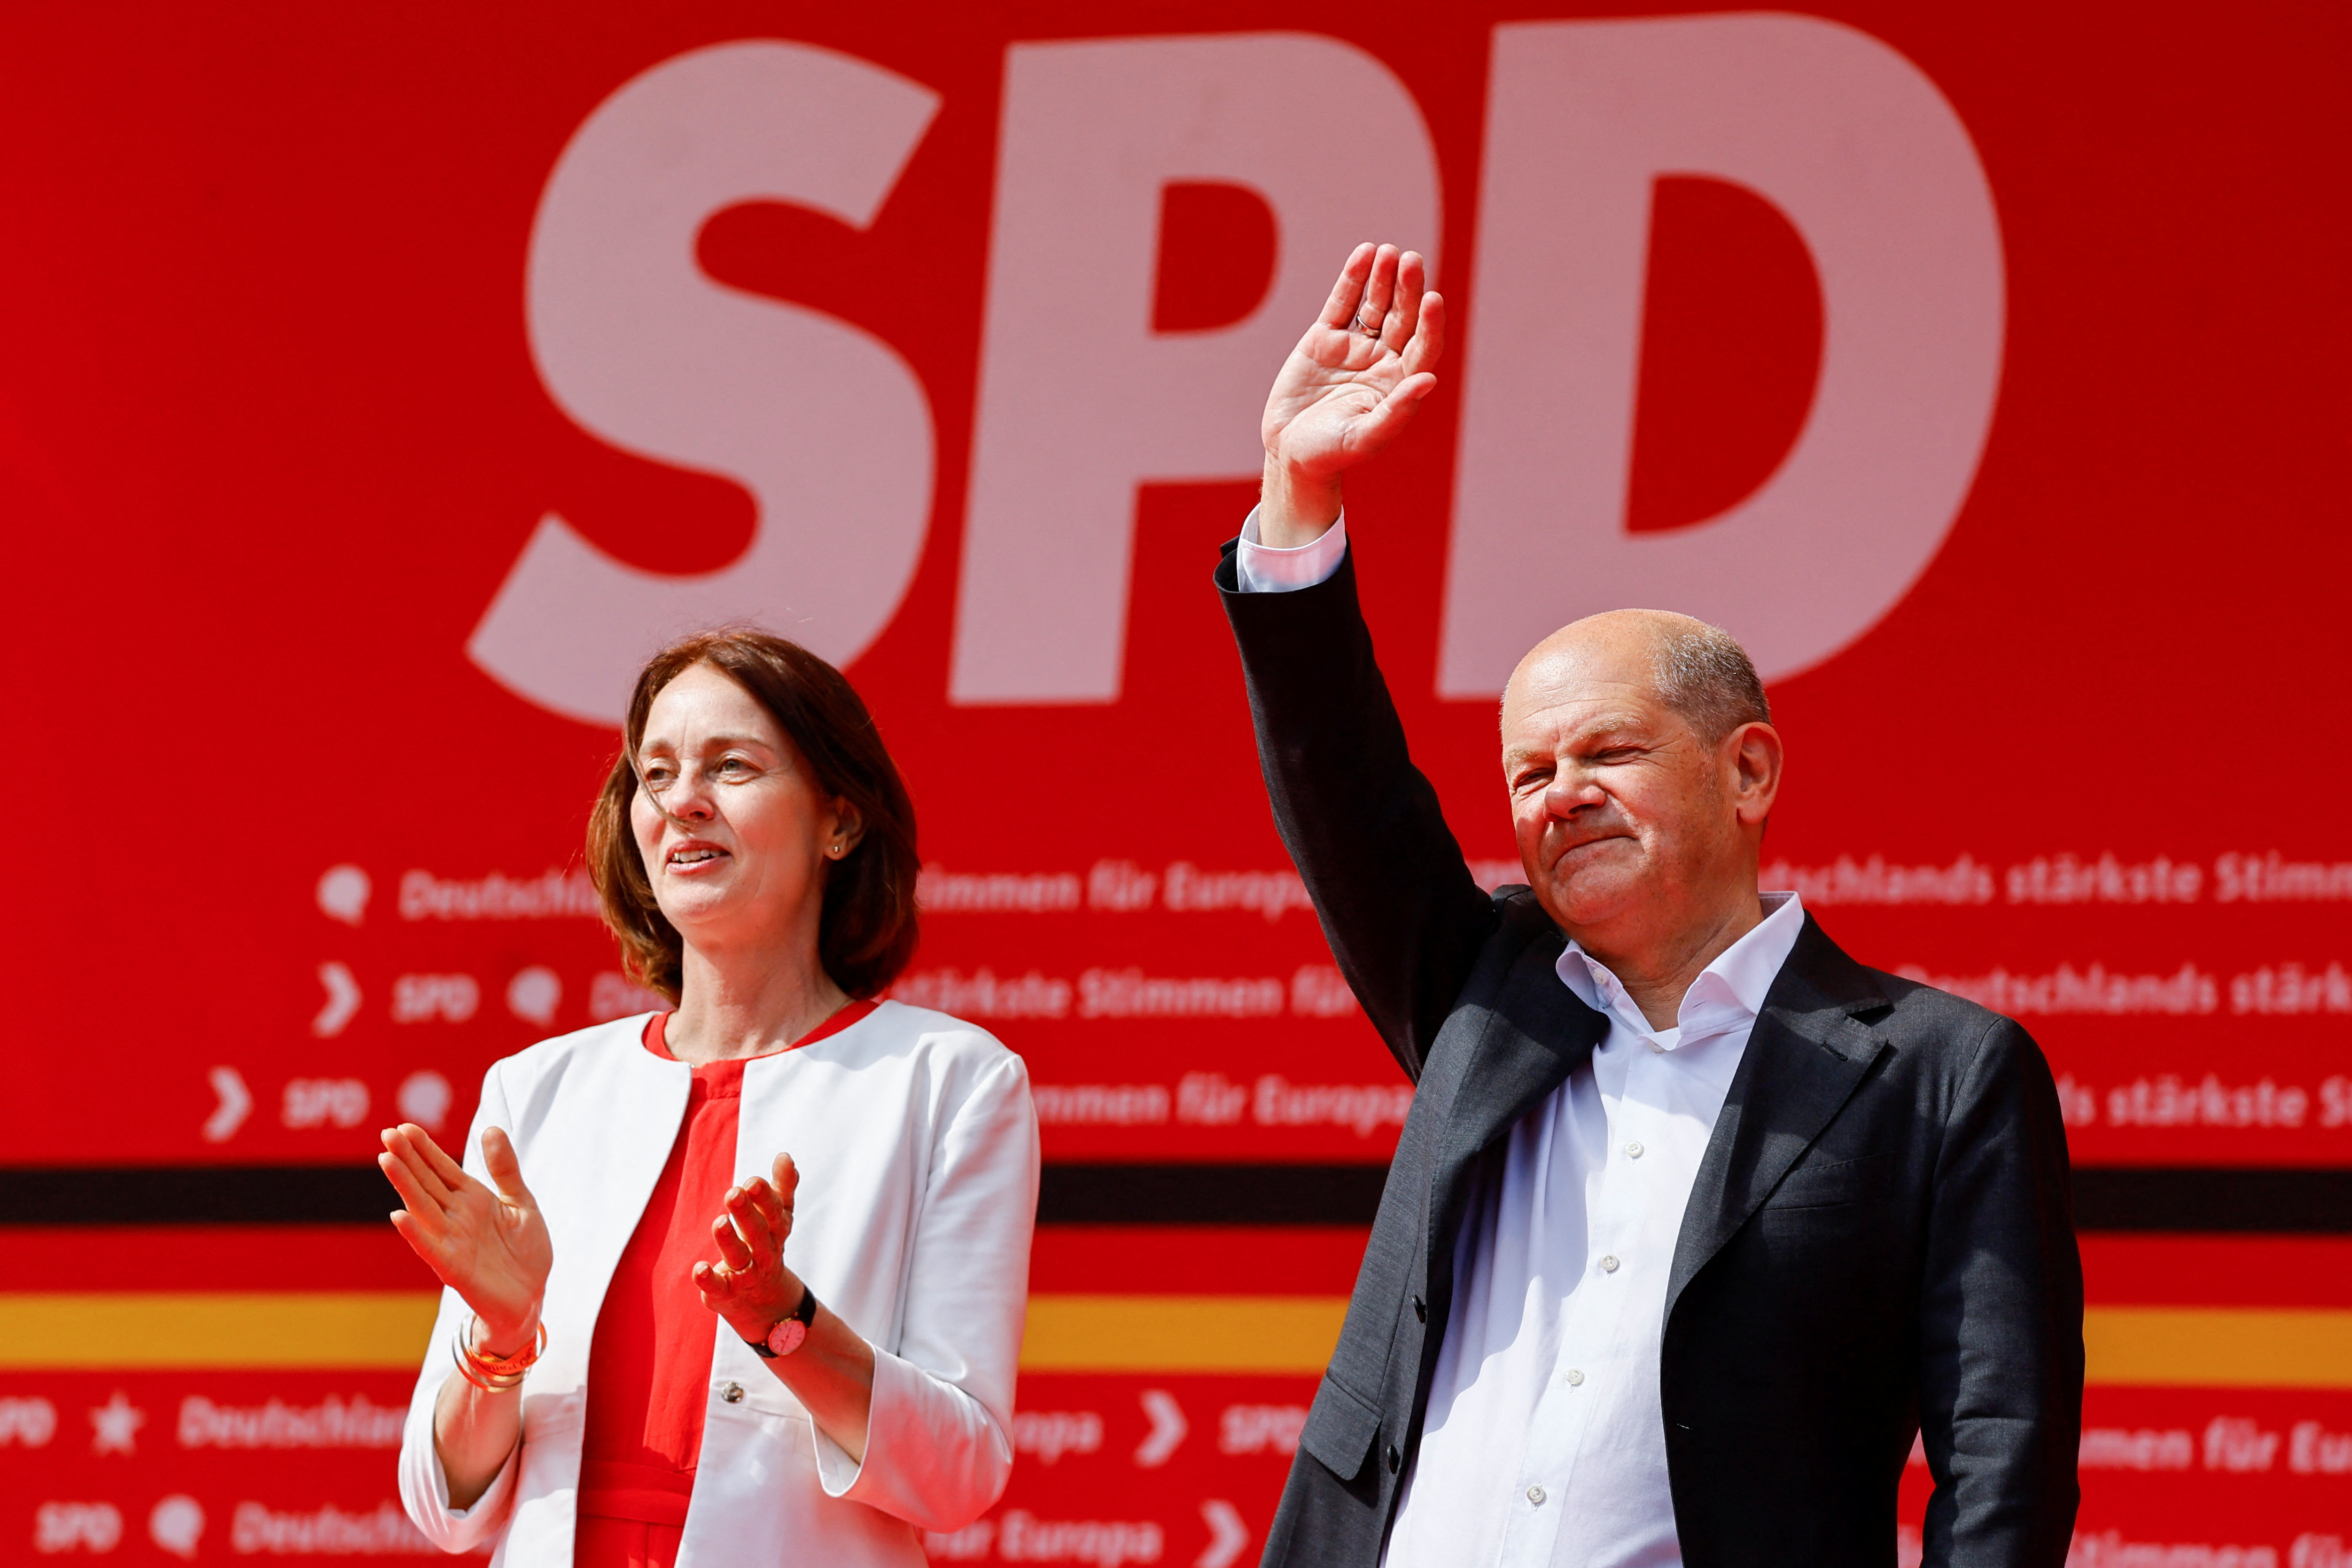 Germany's SPD finish their European election campaign in Duisburg